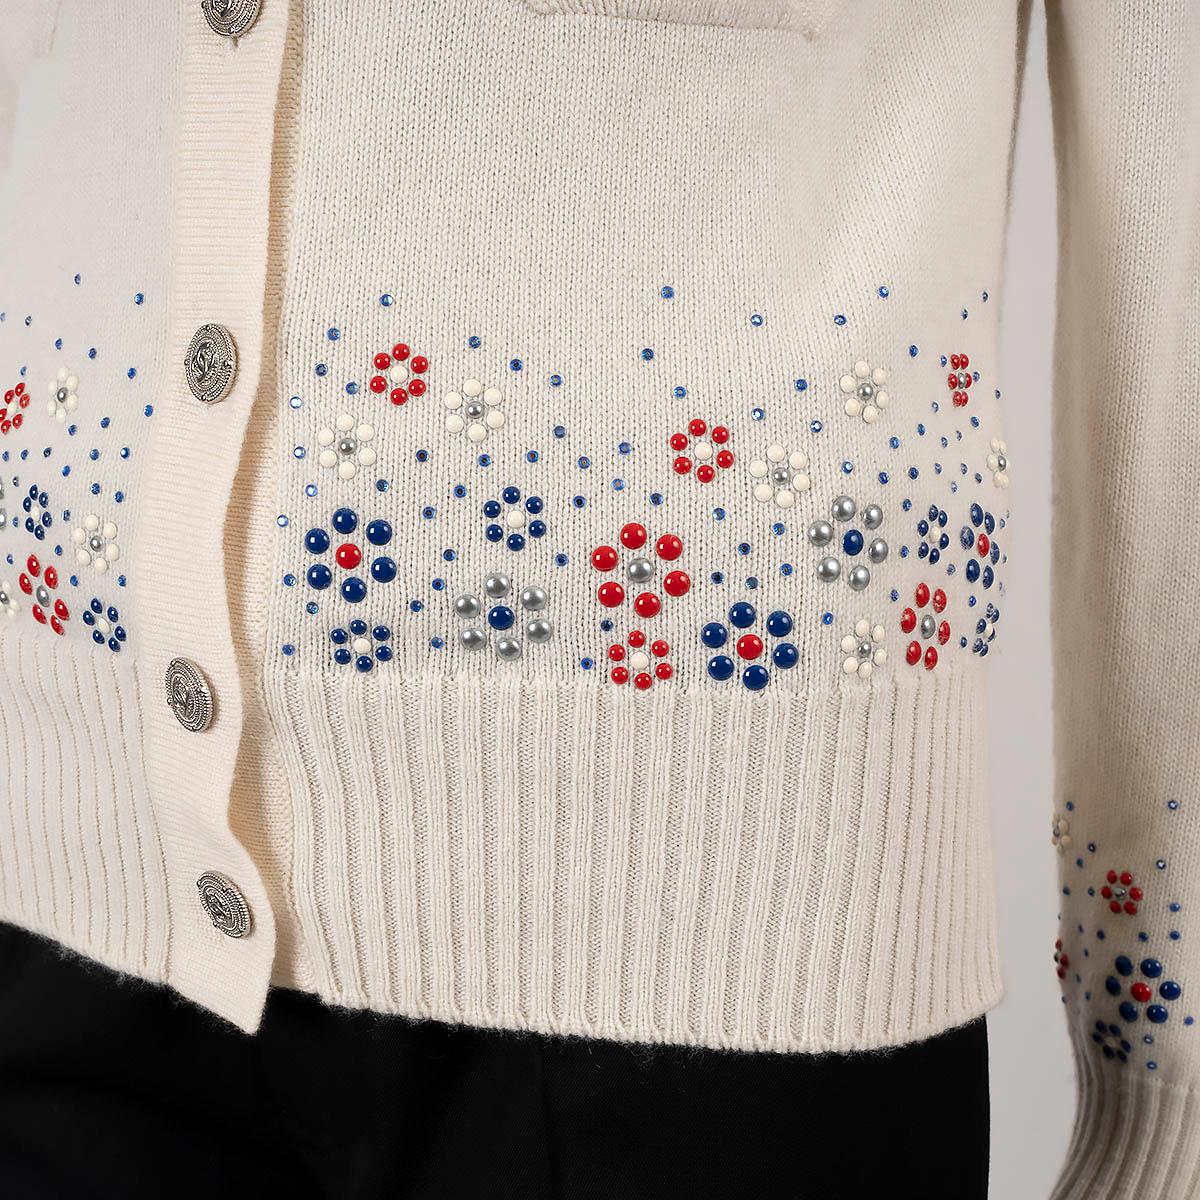 CHANEL cream cashmere 2012 12C FLORAL BEADED Cardigan Sweater 36 XS For Sale 3